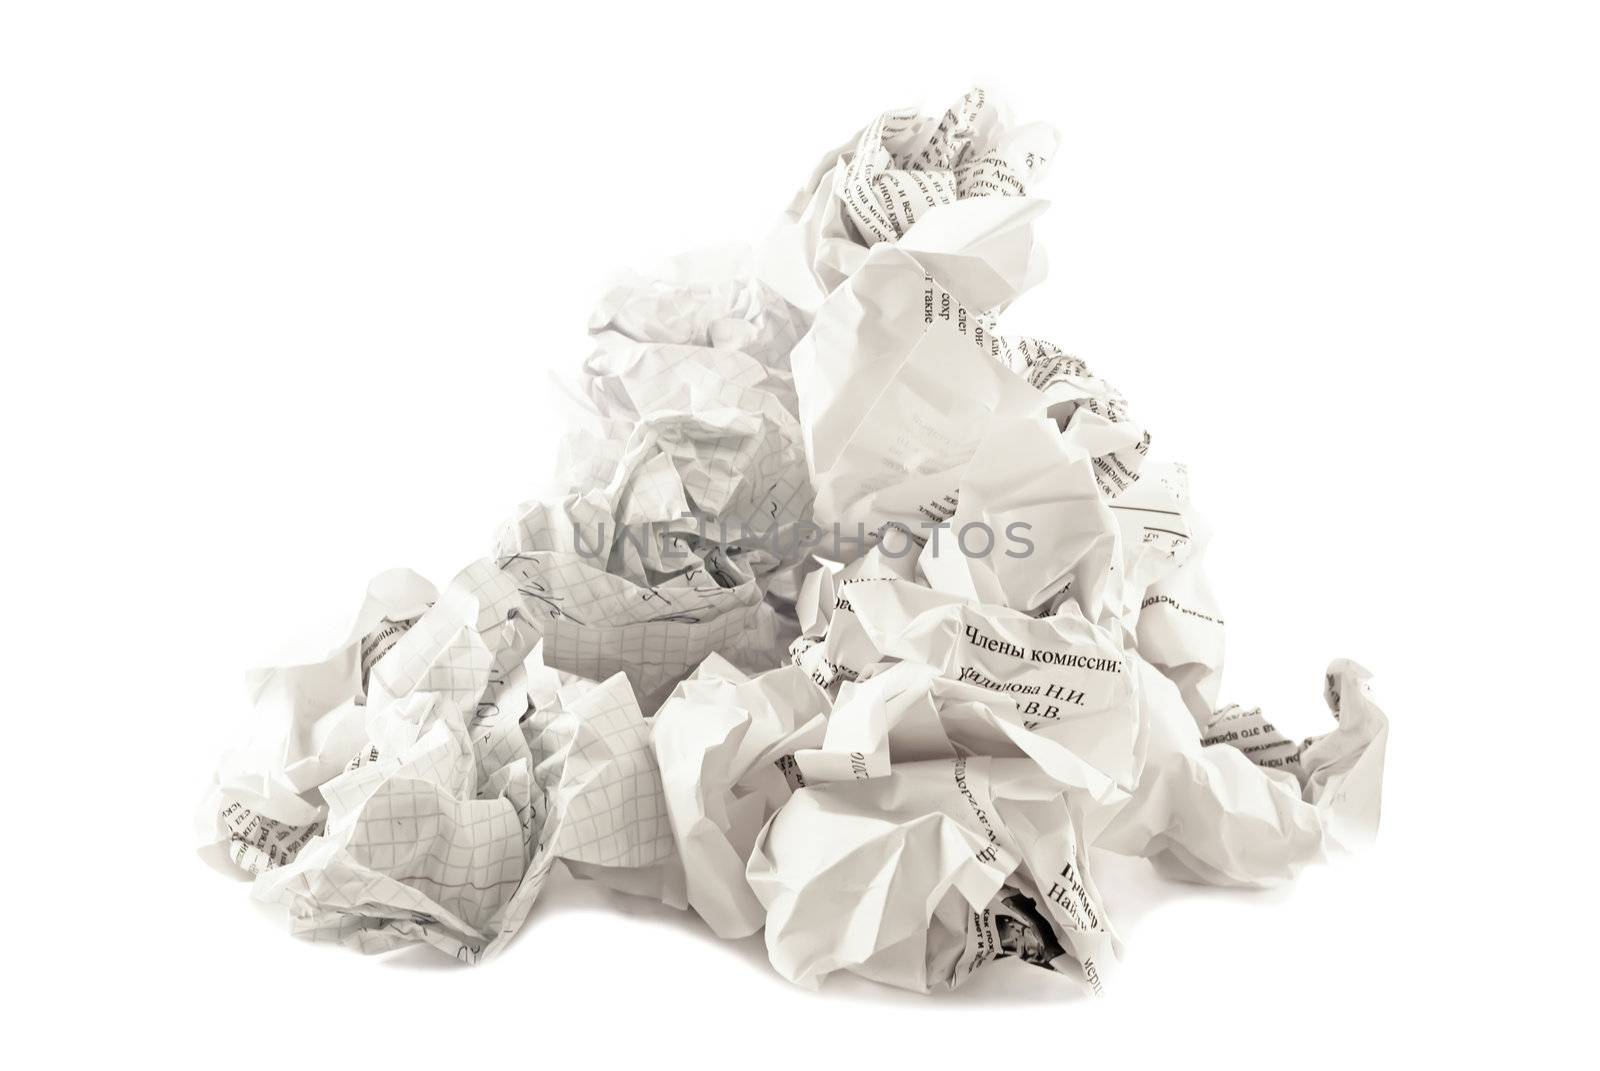 The heap of papers crumpled. White background